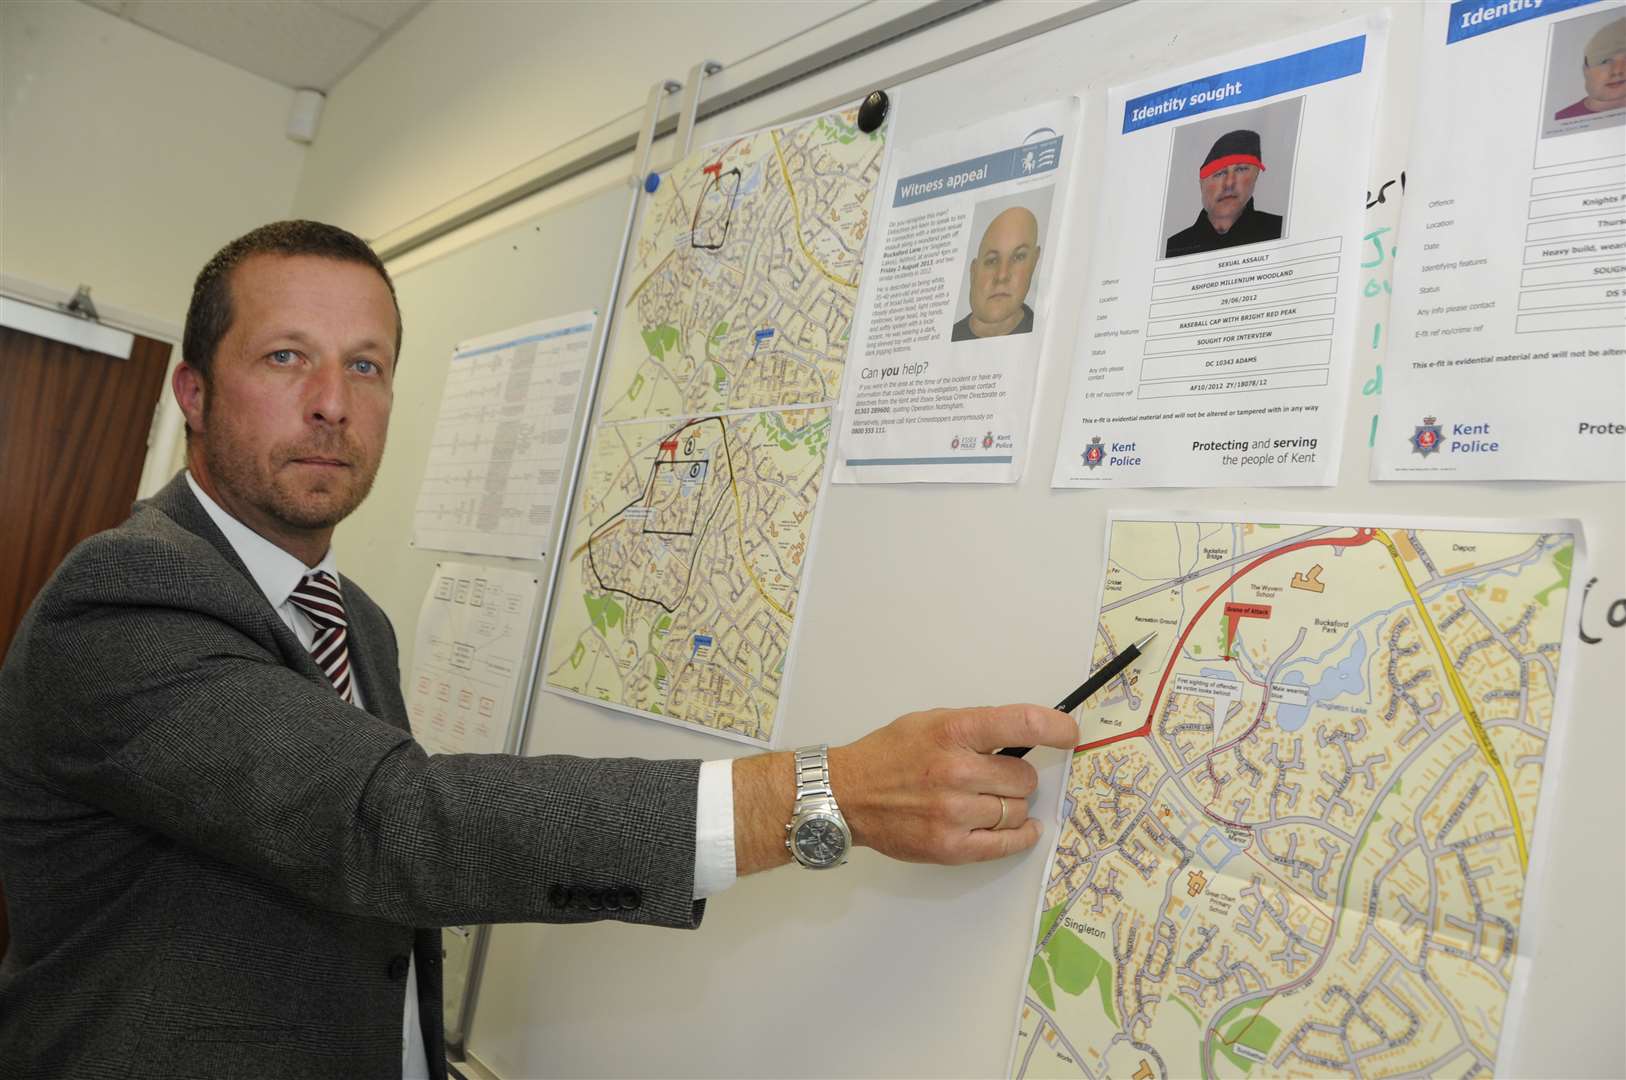 Det Insp Richard Vickery was leading the investigation which eventually caught Williams and brought him to justice